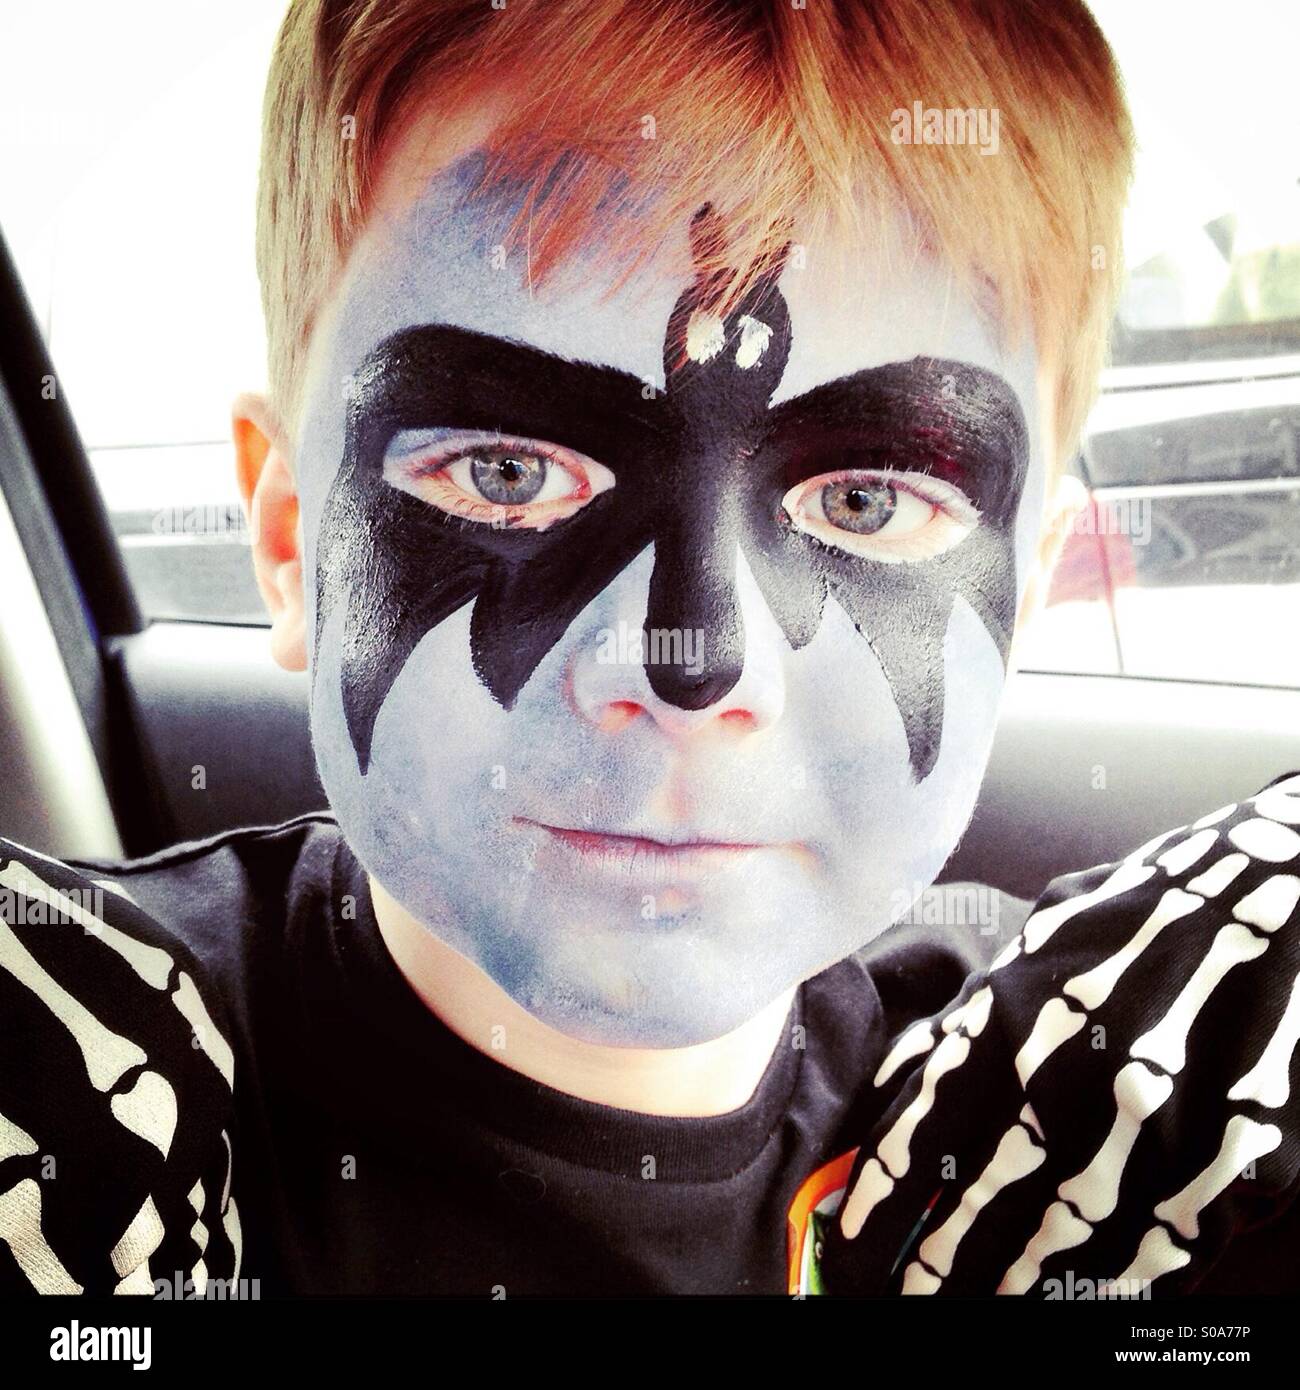 Face painting. Boy with face painted as Batman Stock Photo - Alamy